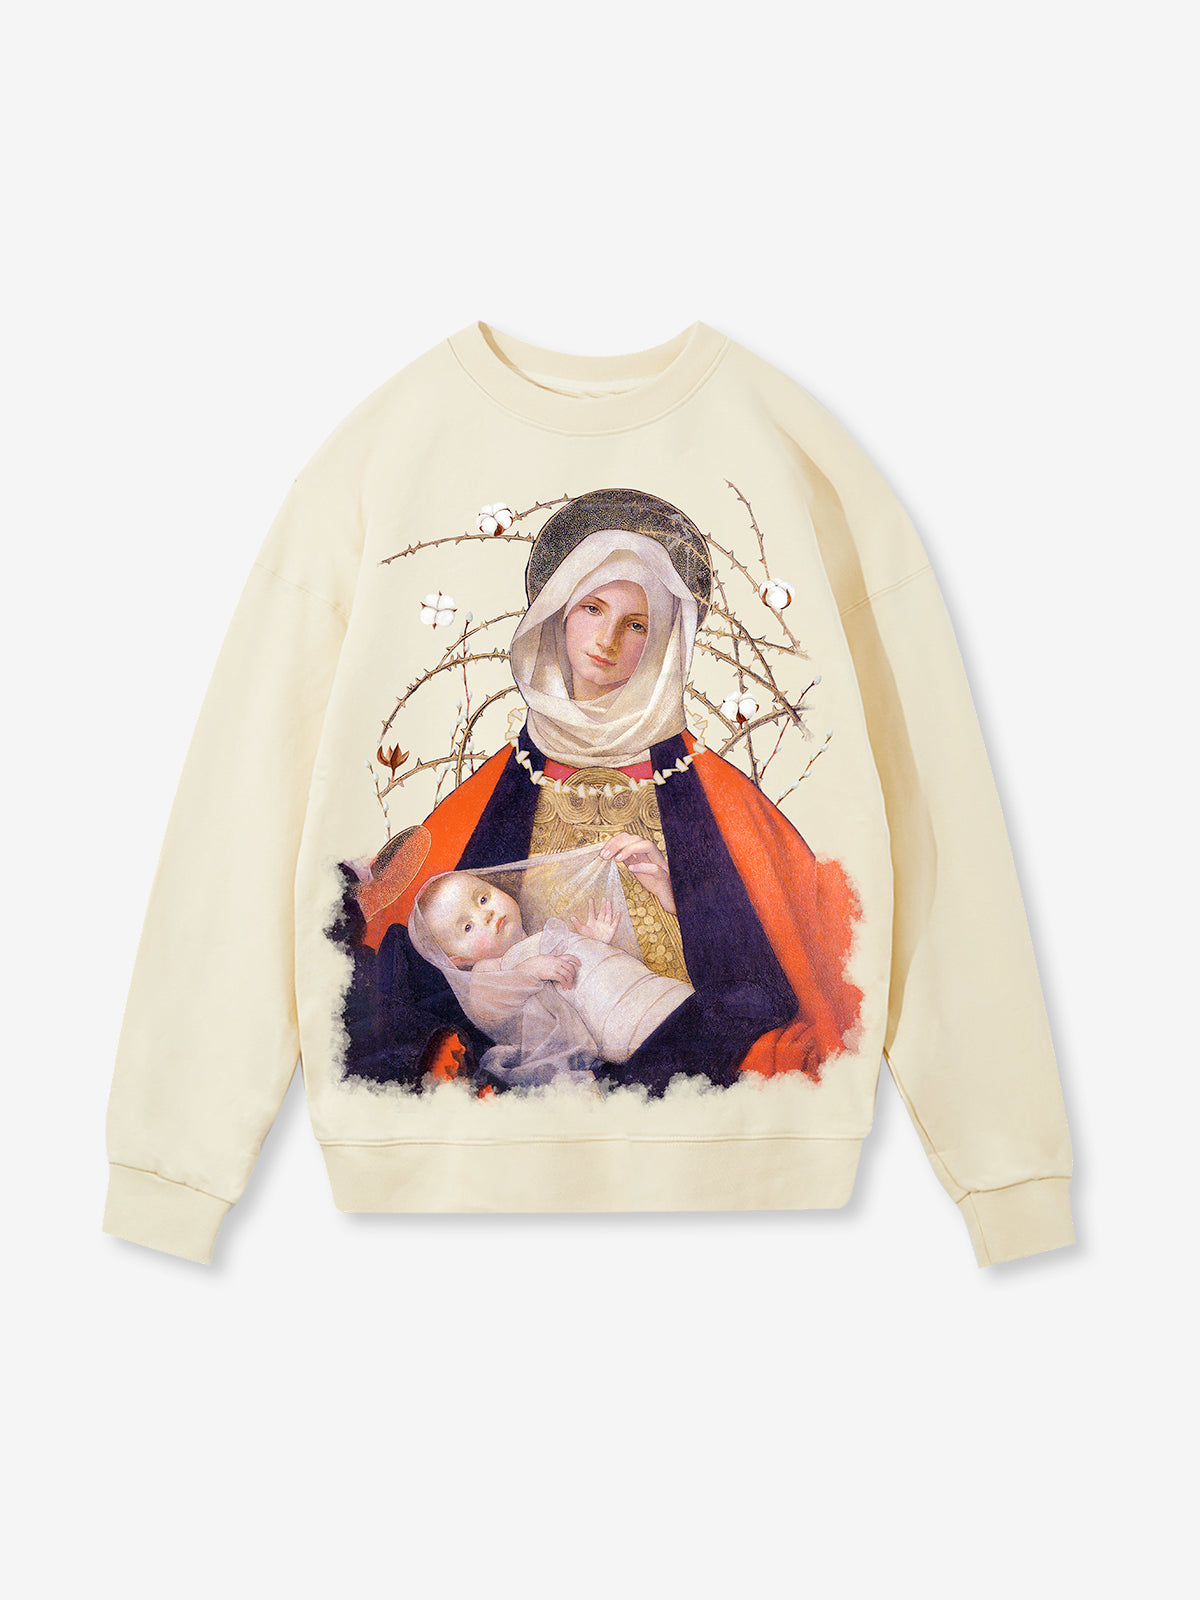 OBSTACLES & DANGERS© Artistic Black Madonna and Child Sweatshirt